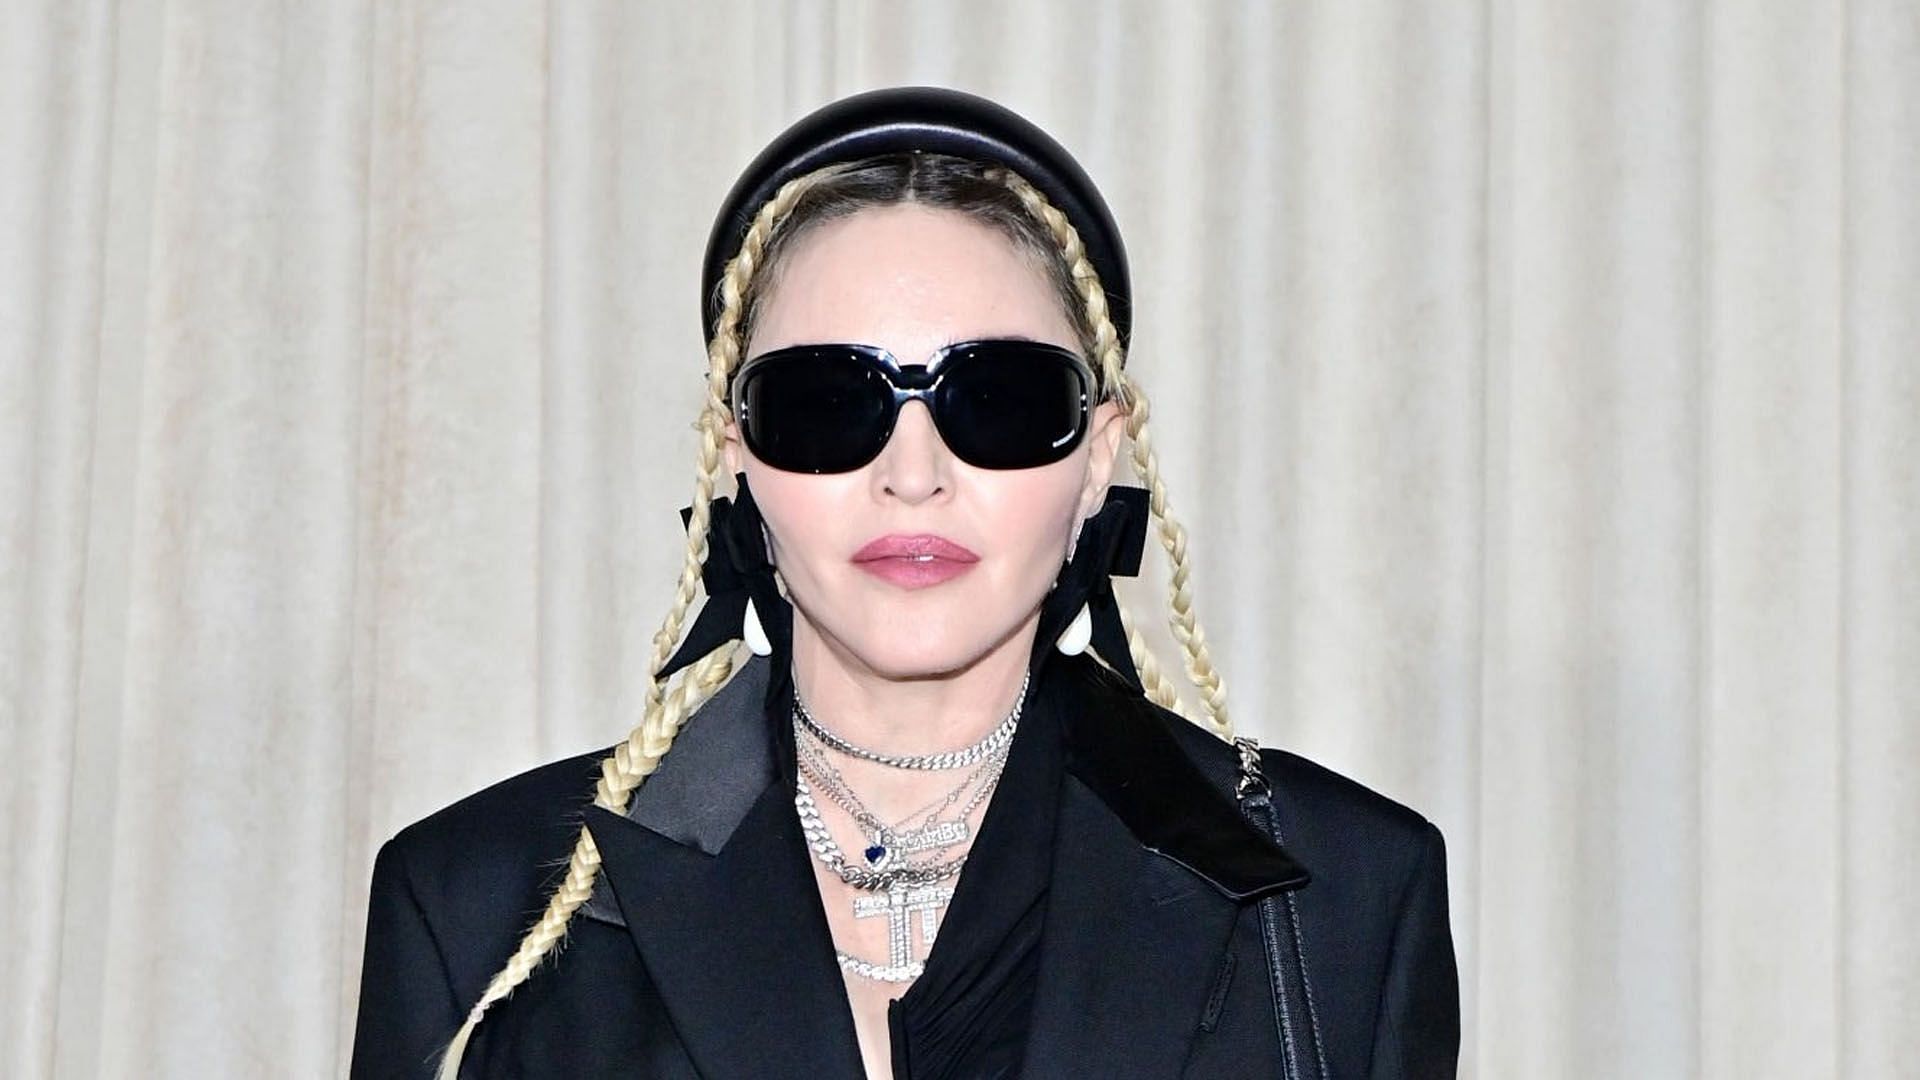 Desperate For Attention Madonna Raises Eyebrows With Lace Balaclava And Whip In Tiktok Video 6027